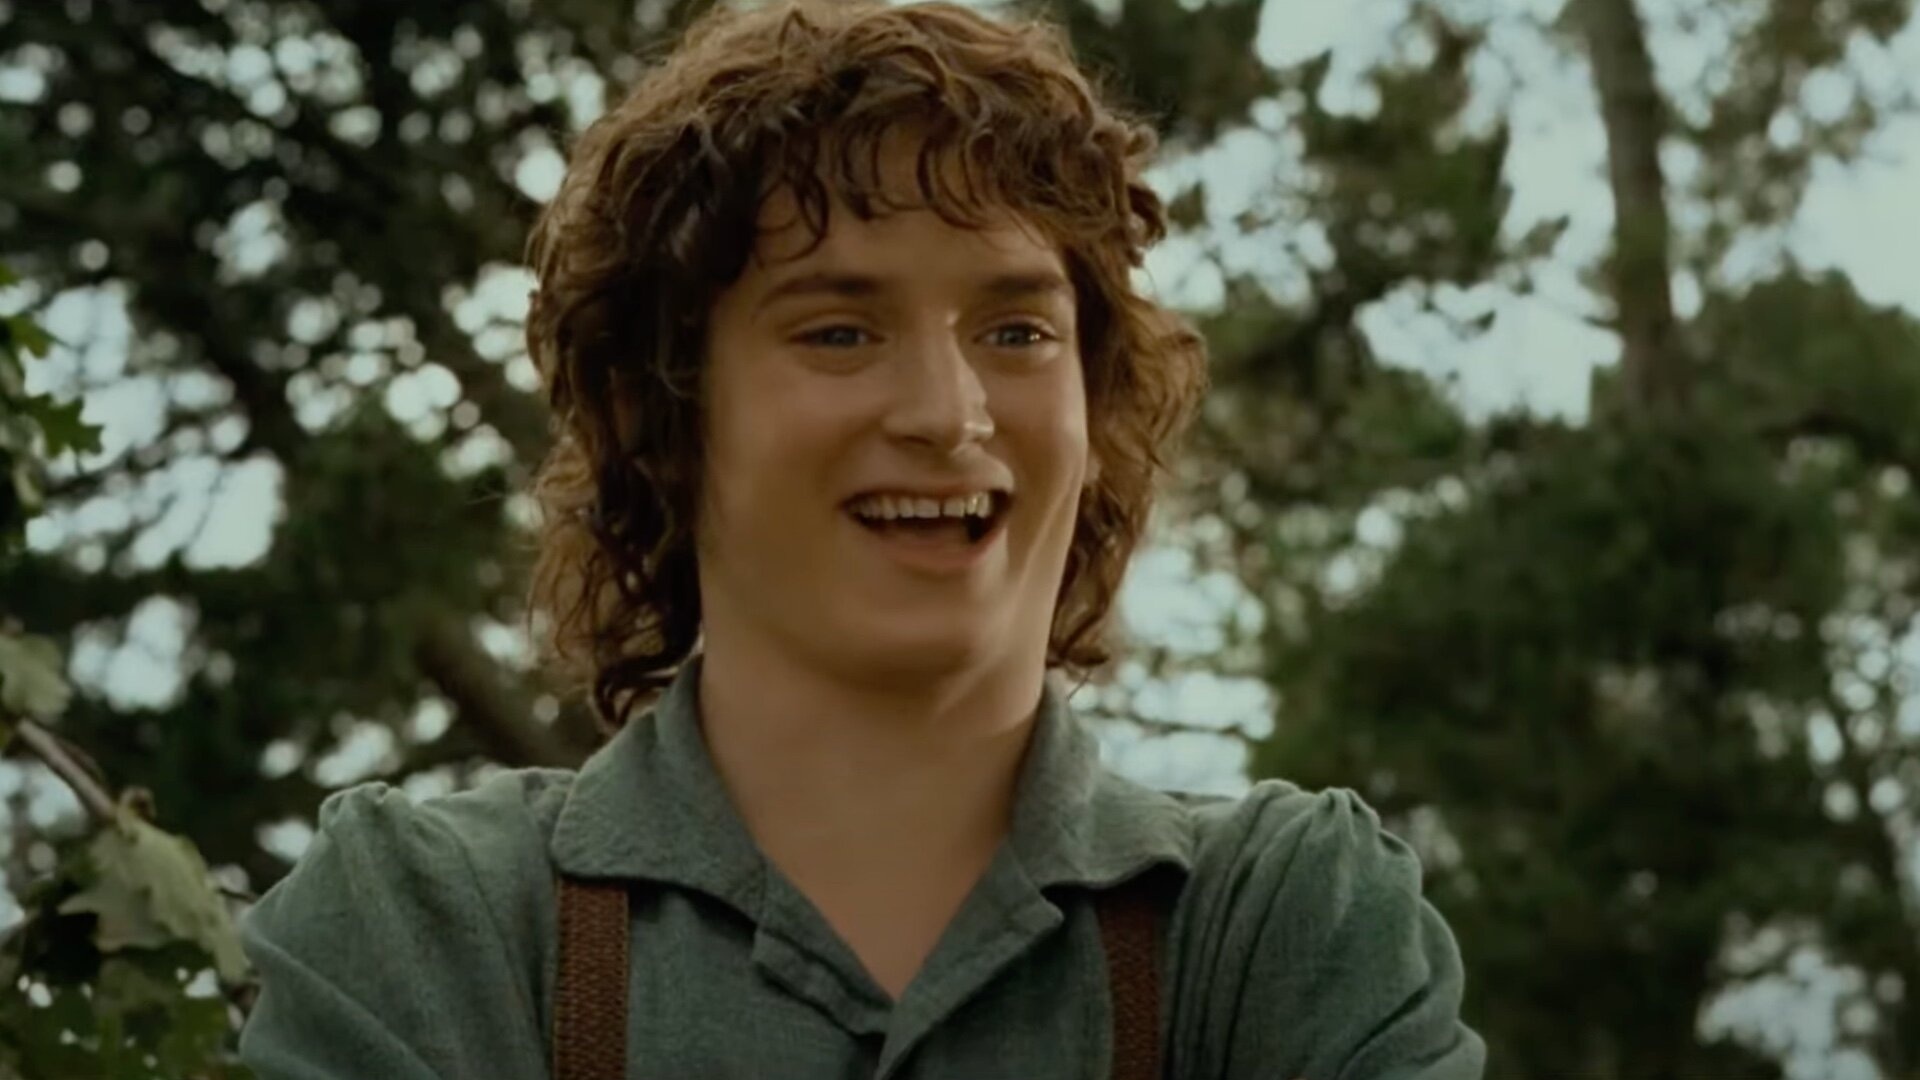 Hobbits, Laughing compilation, Lord of the Rings and The Hobbit films, Humorous scenes, 1920x1080 Full HD Desktop